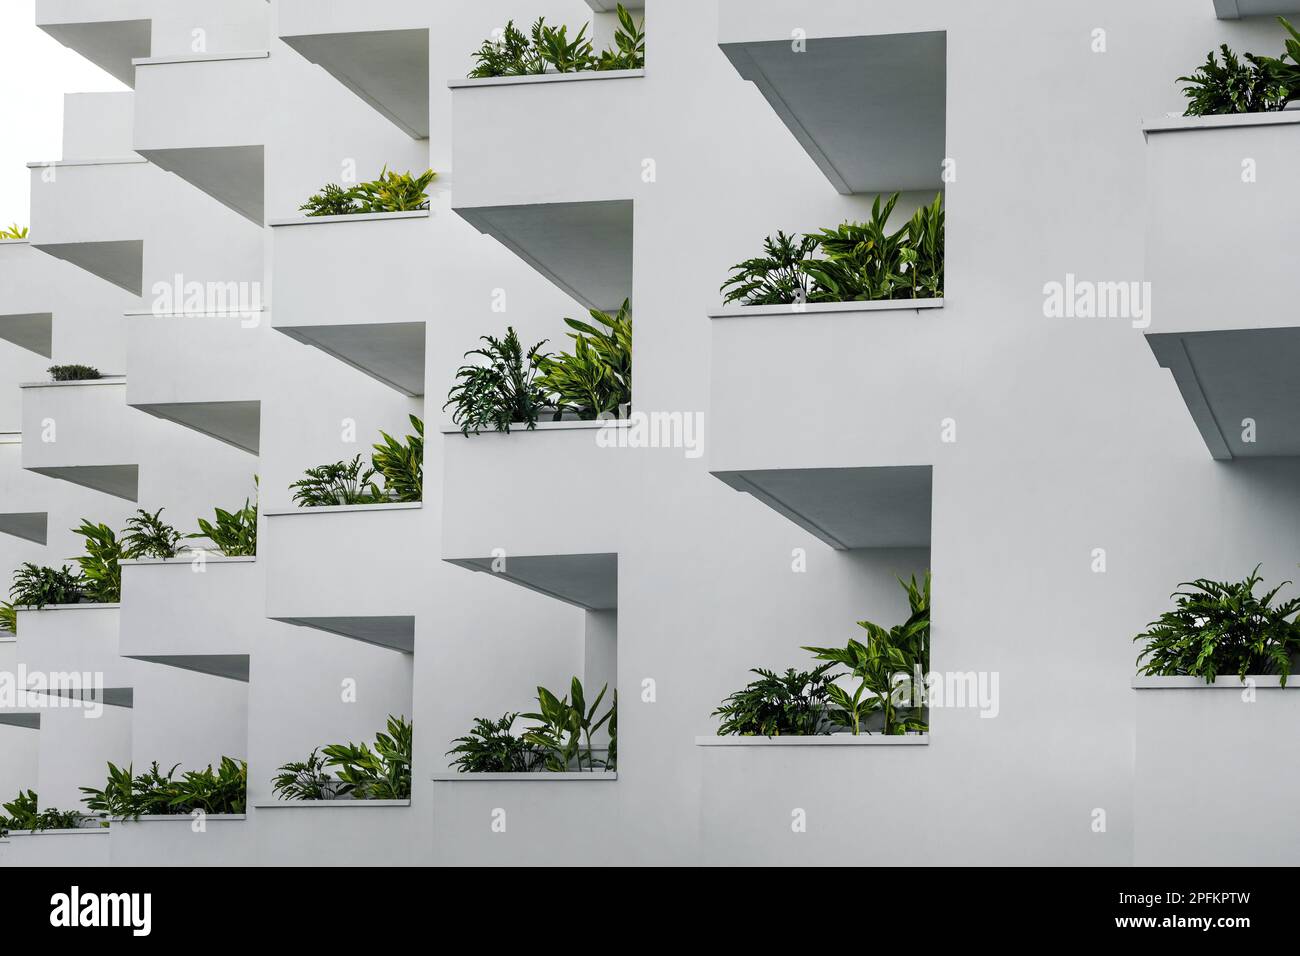 exterior of white residential apartment building with green plants on balconies. modern city architecture Stock Photo